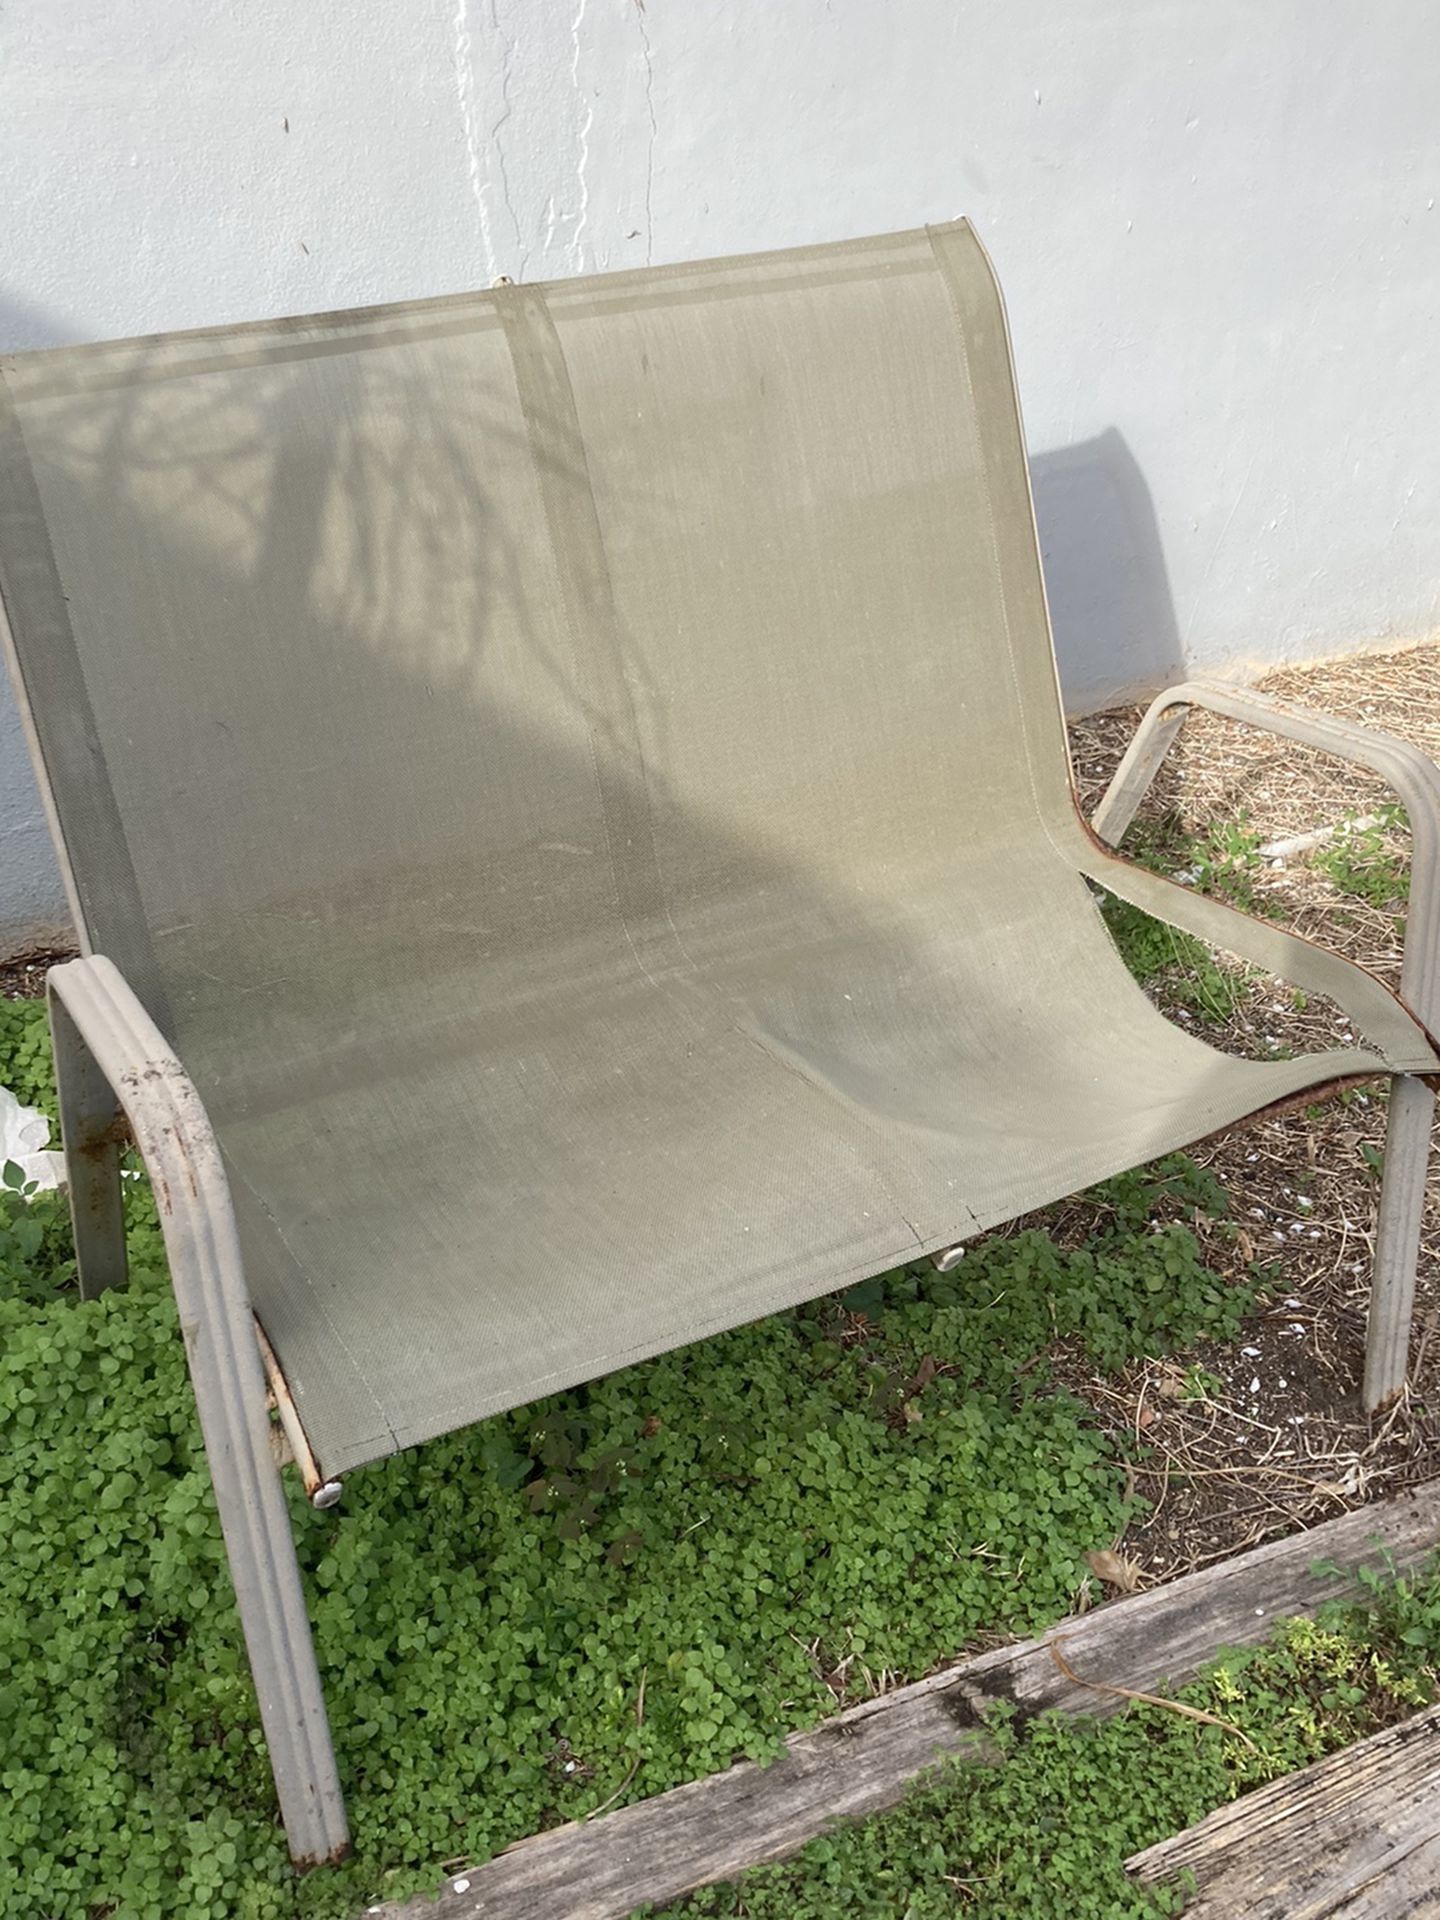 FREE OUTDOOR CHAIR